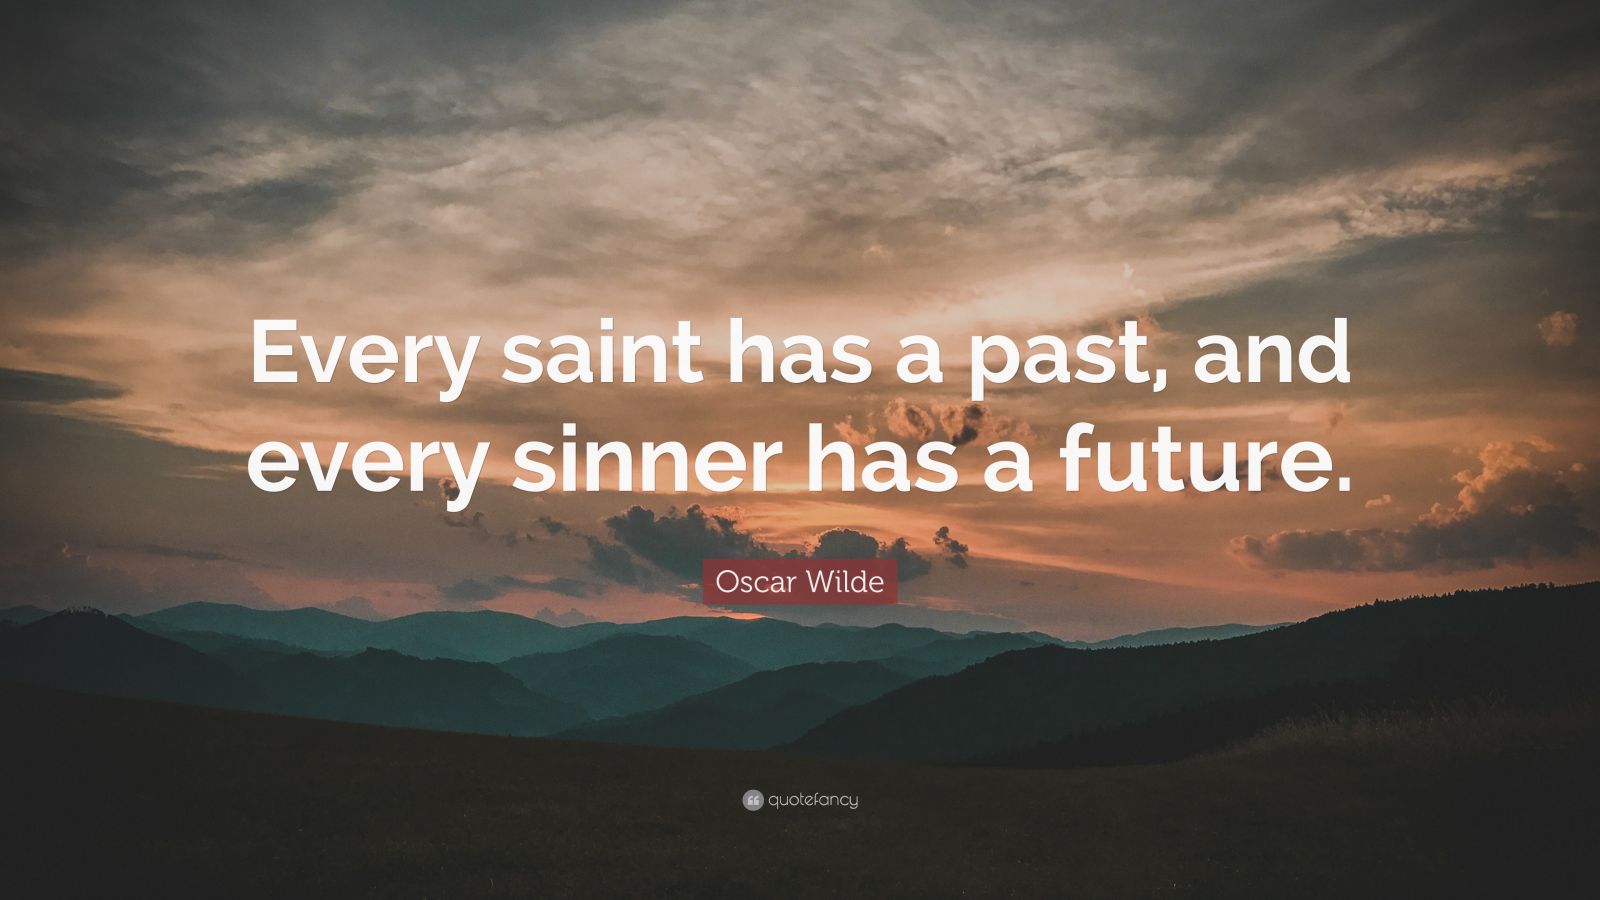 Oscar Wilde Quote: “Every saint has a past, and every sinner has a future.”